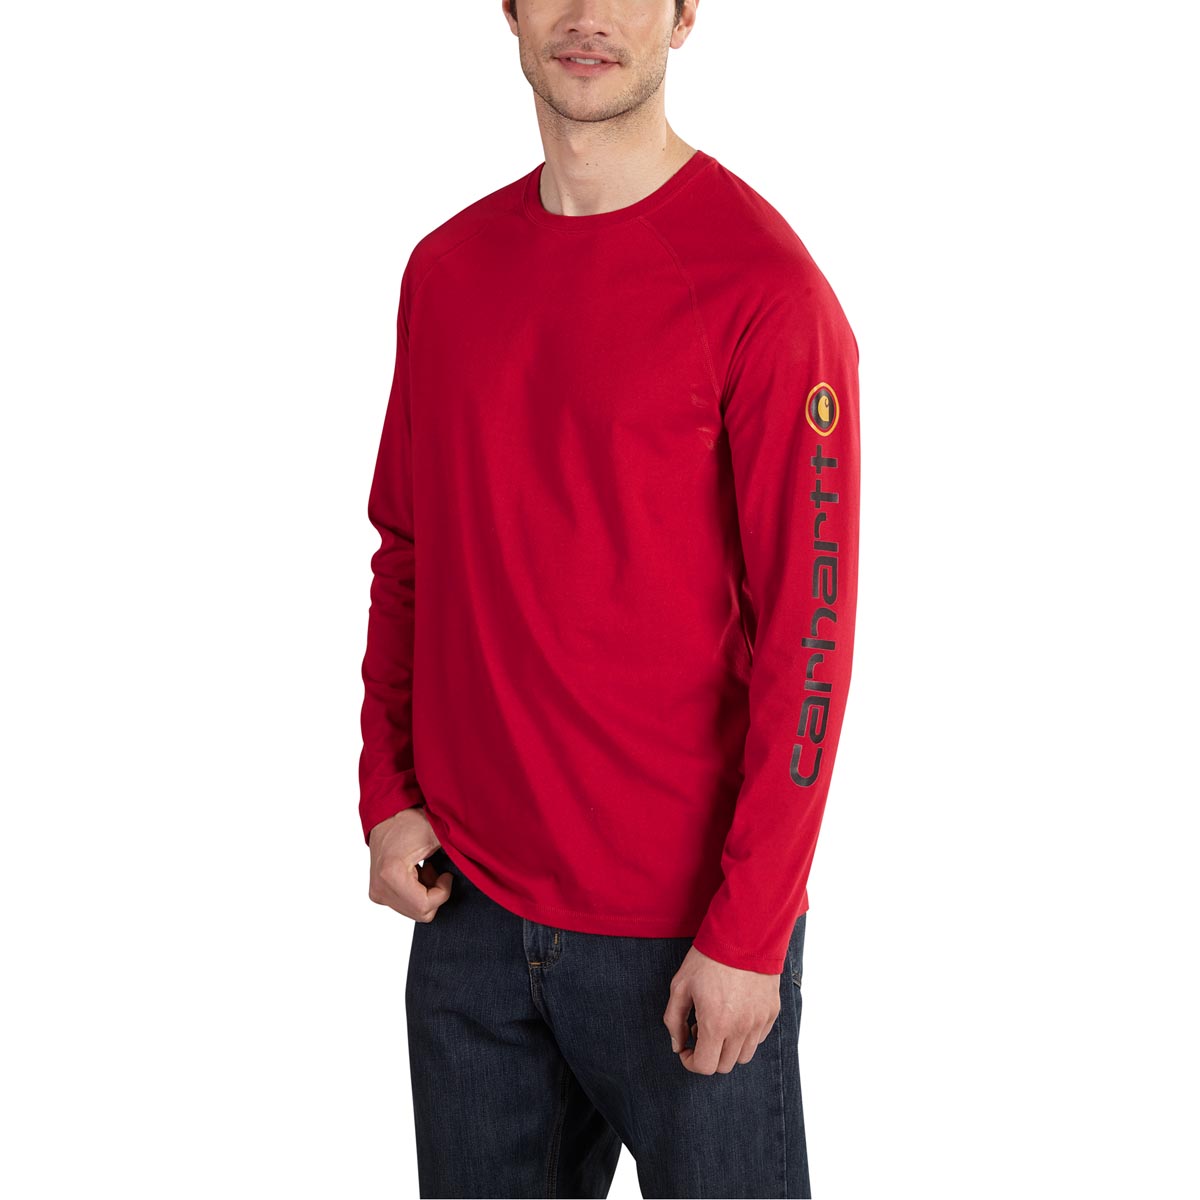 Carhartt Men's Force Cotton Delmont Sleeve Graphic T Shirt Discontinued Pricing